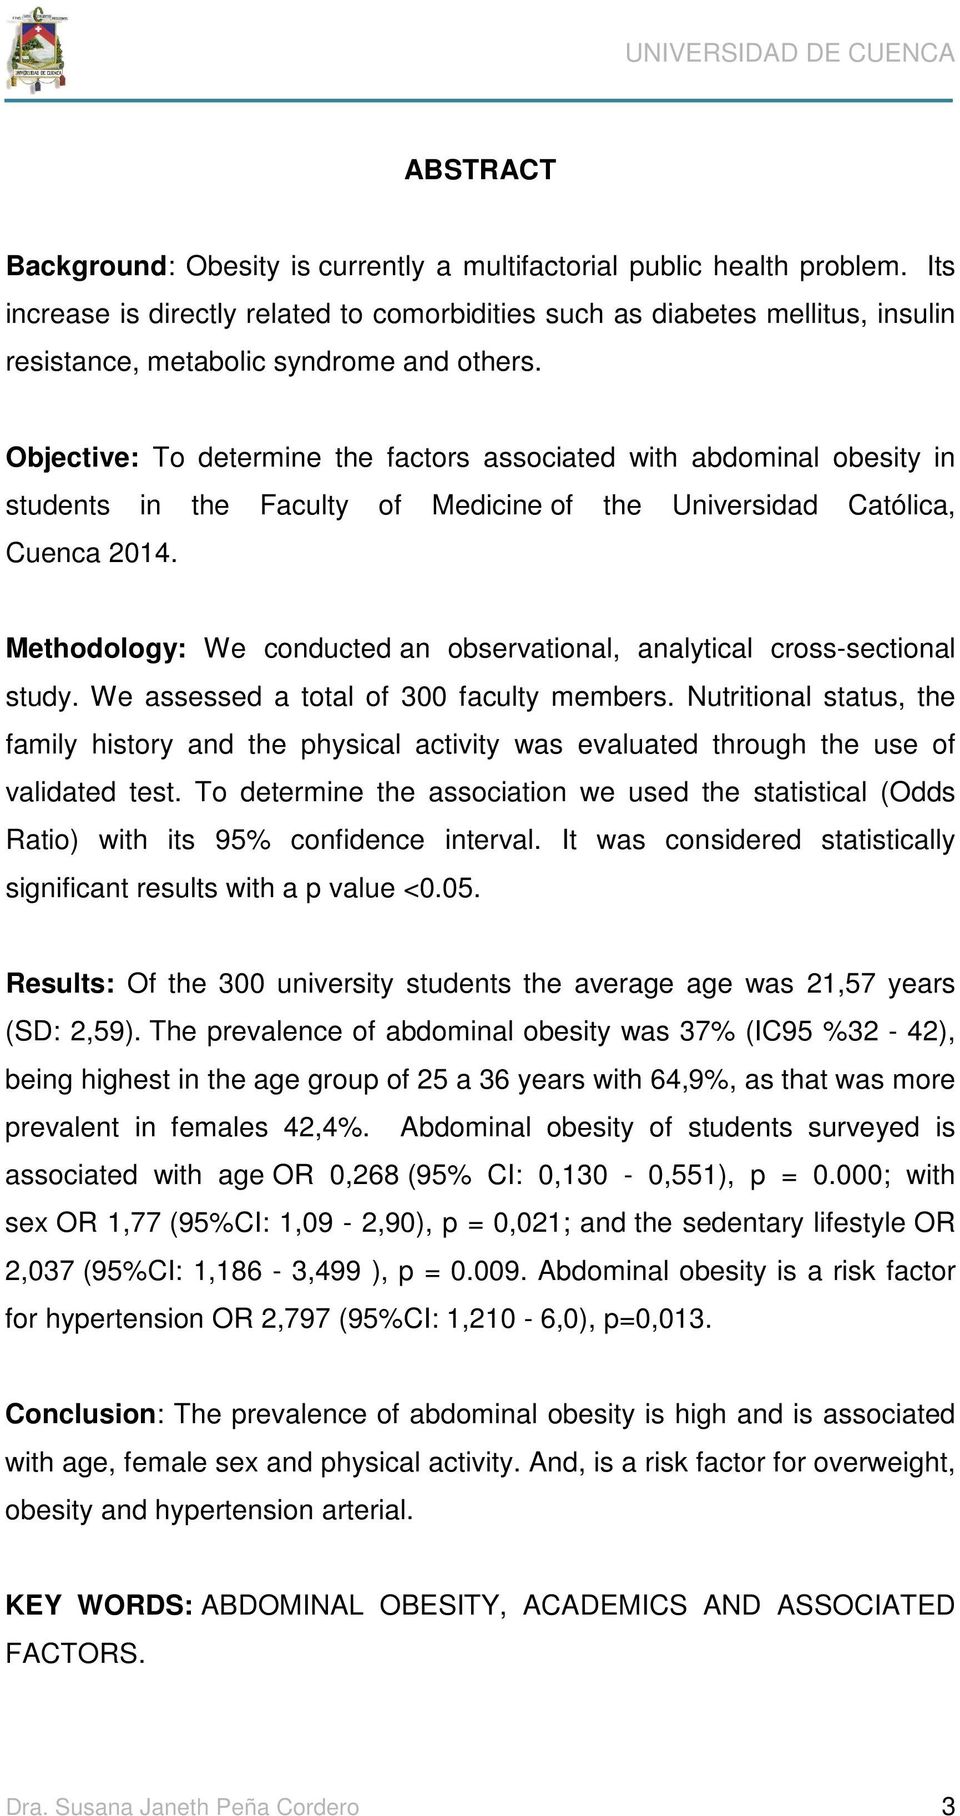 Objective: To determine the factors associated with abdominal obesity in students in the Faculty of Medicine of the Universidad Católica, Cuenca 2014.